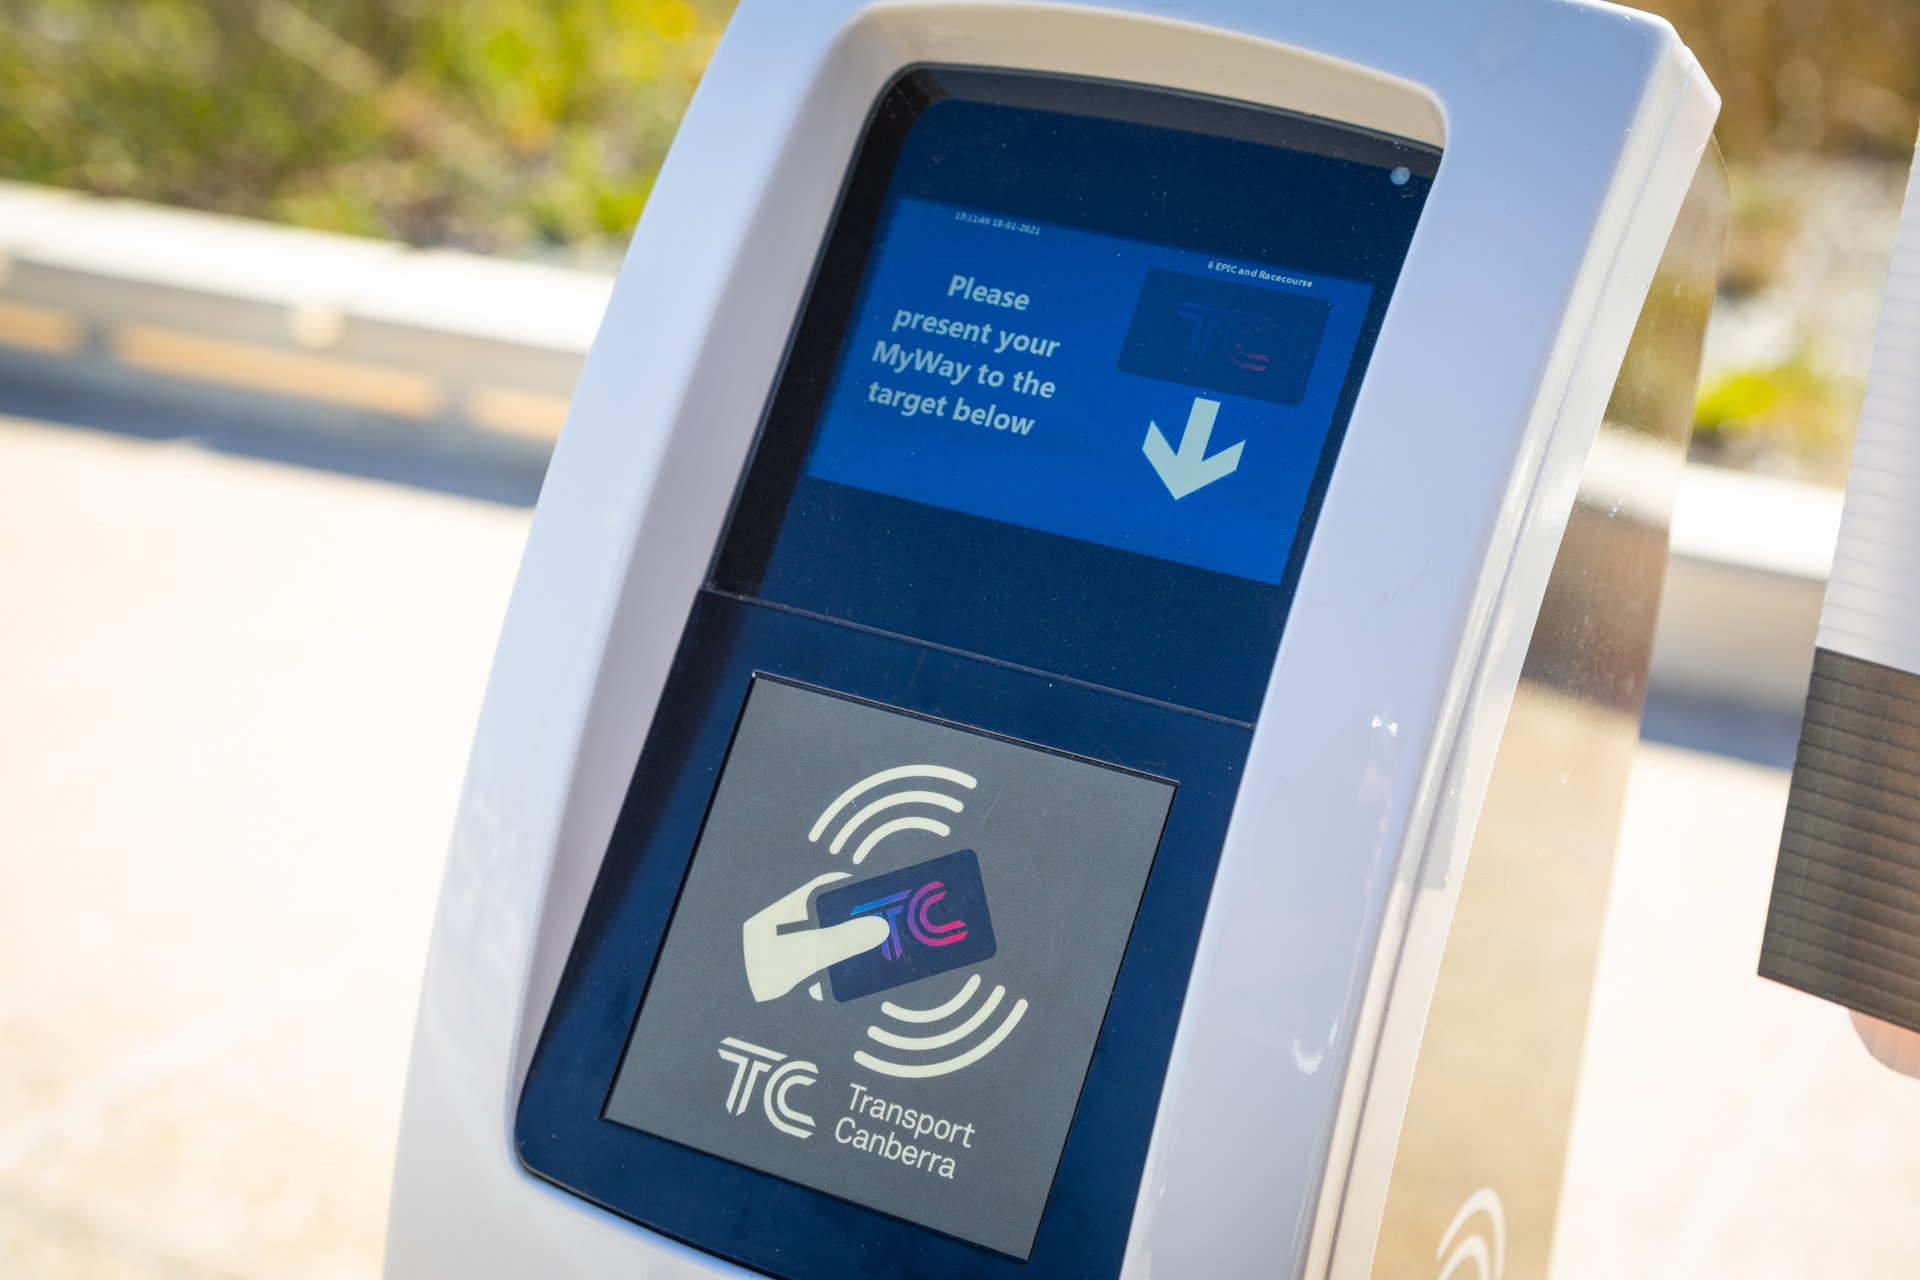 Still no supplier for long-promised upgrades to ACT's public transport ticketing system